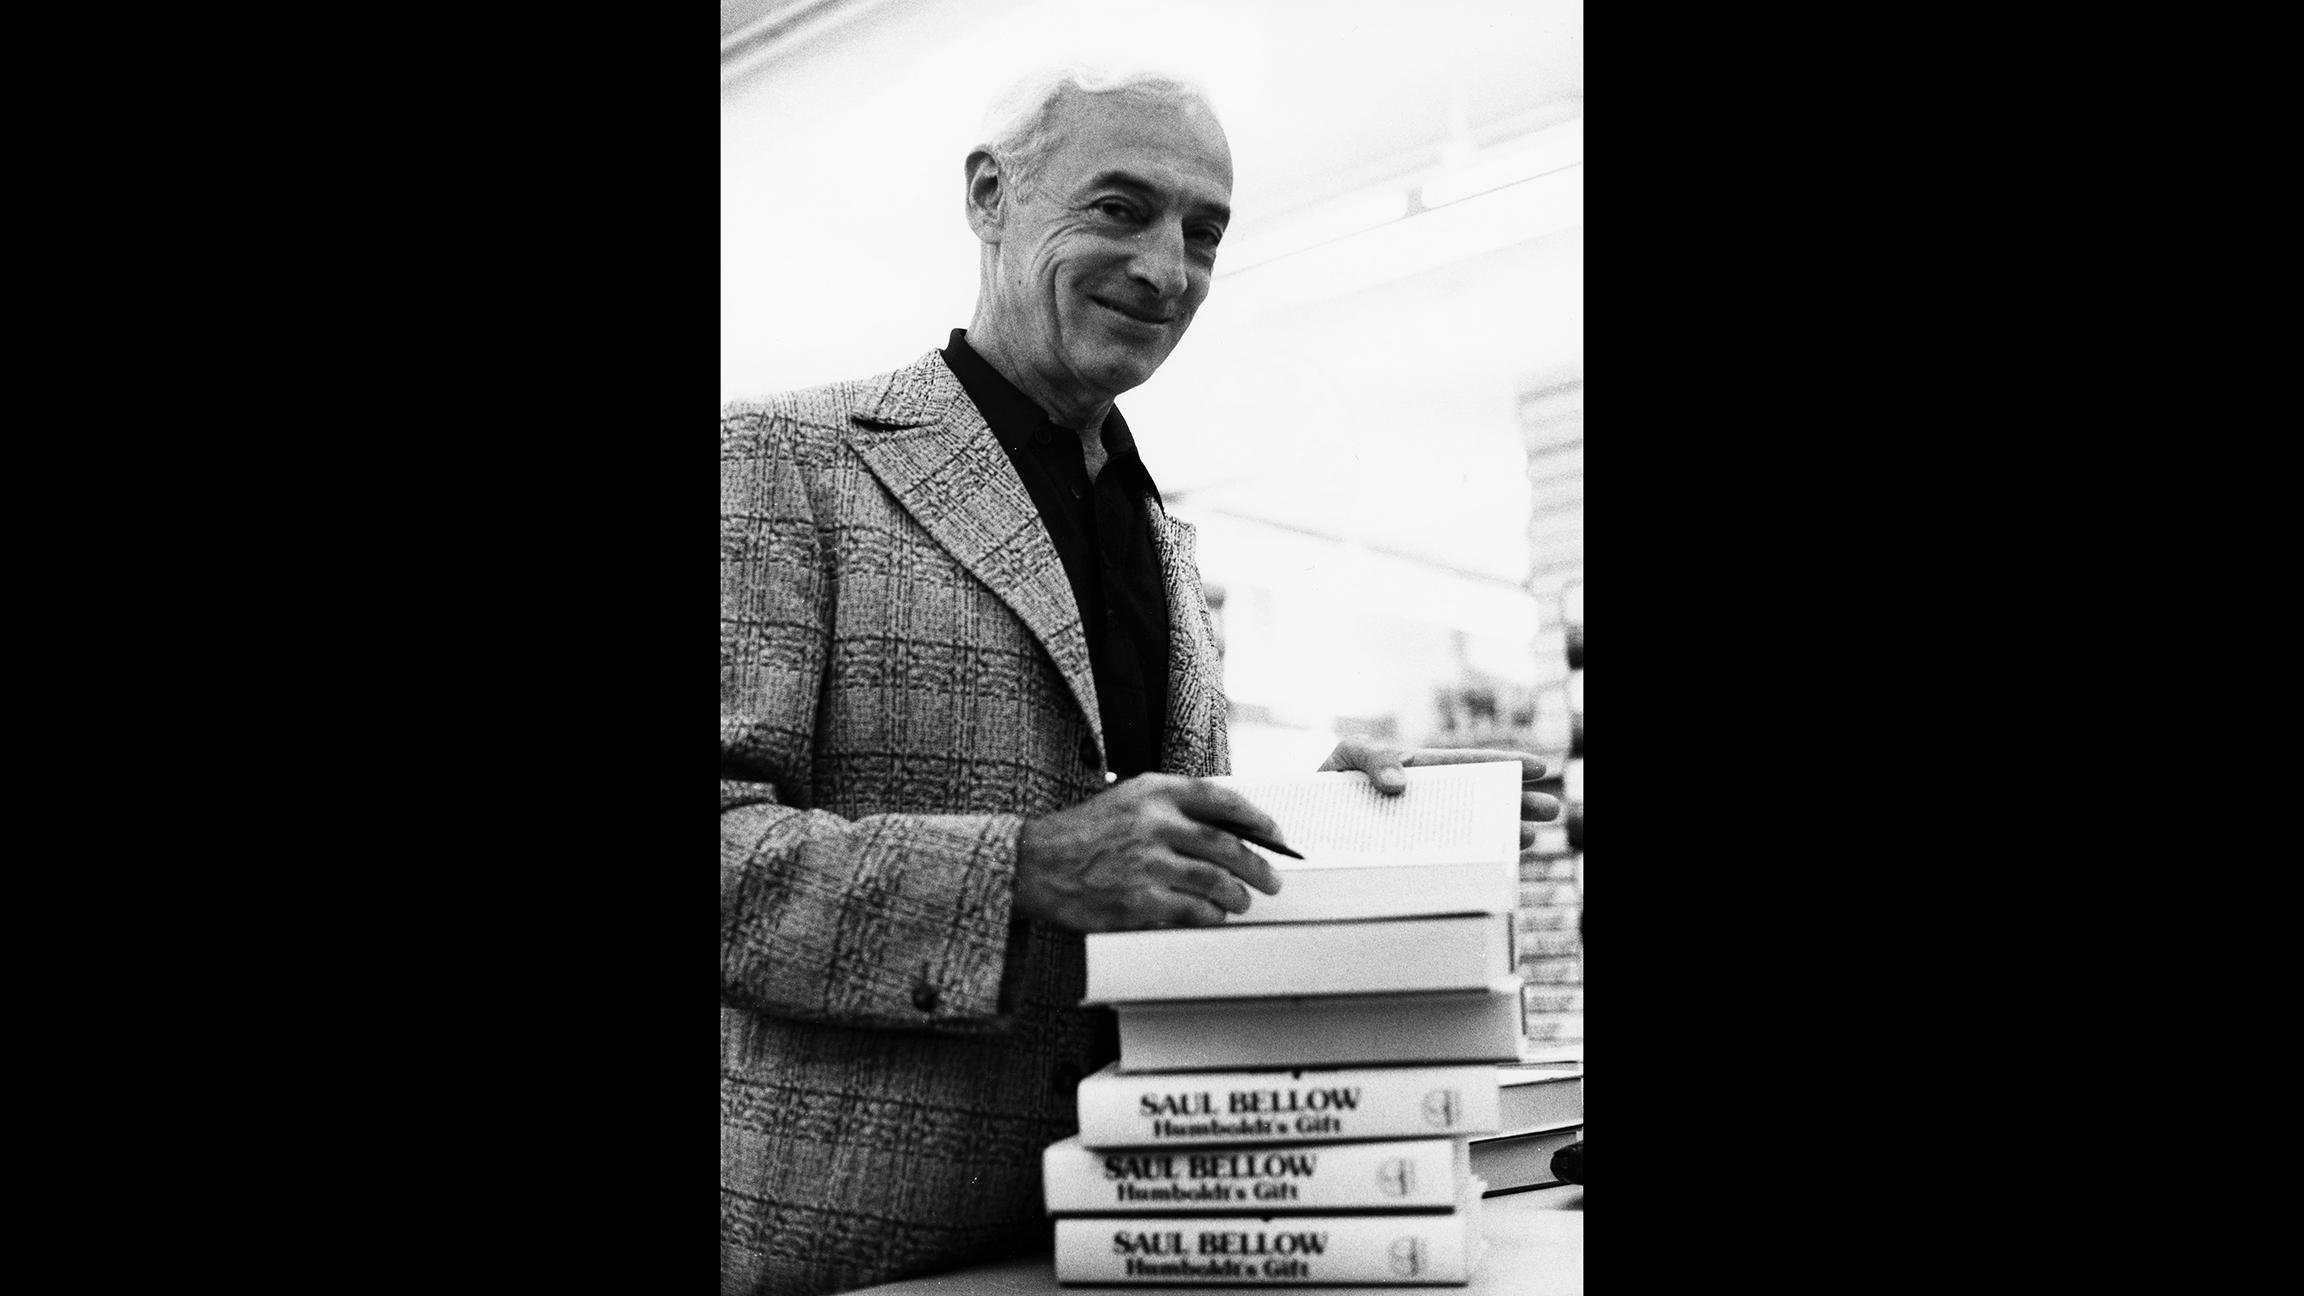 Saul Bellow (Photo: John Vail / Special Collections Research Center, University of Chicago Library)